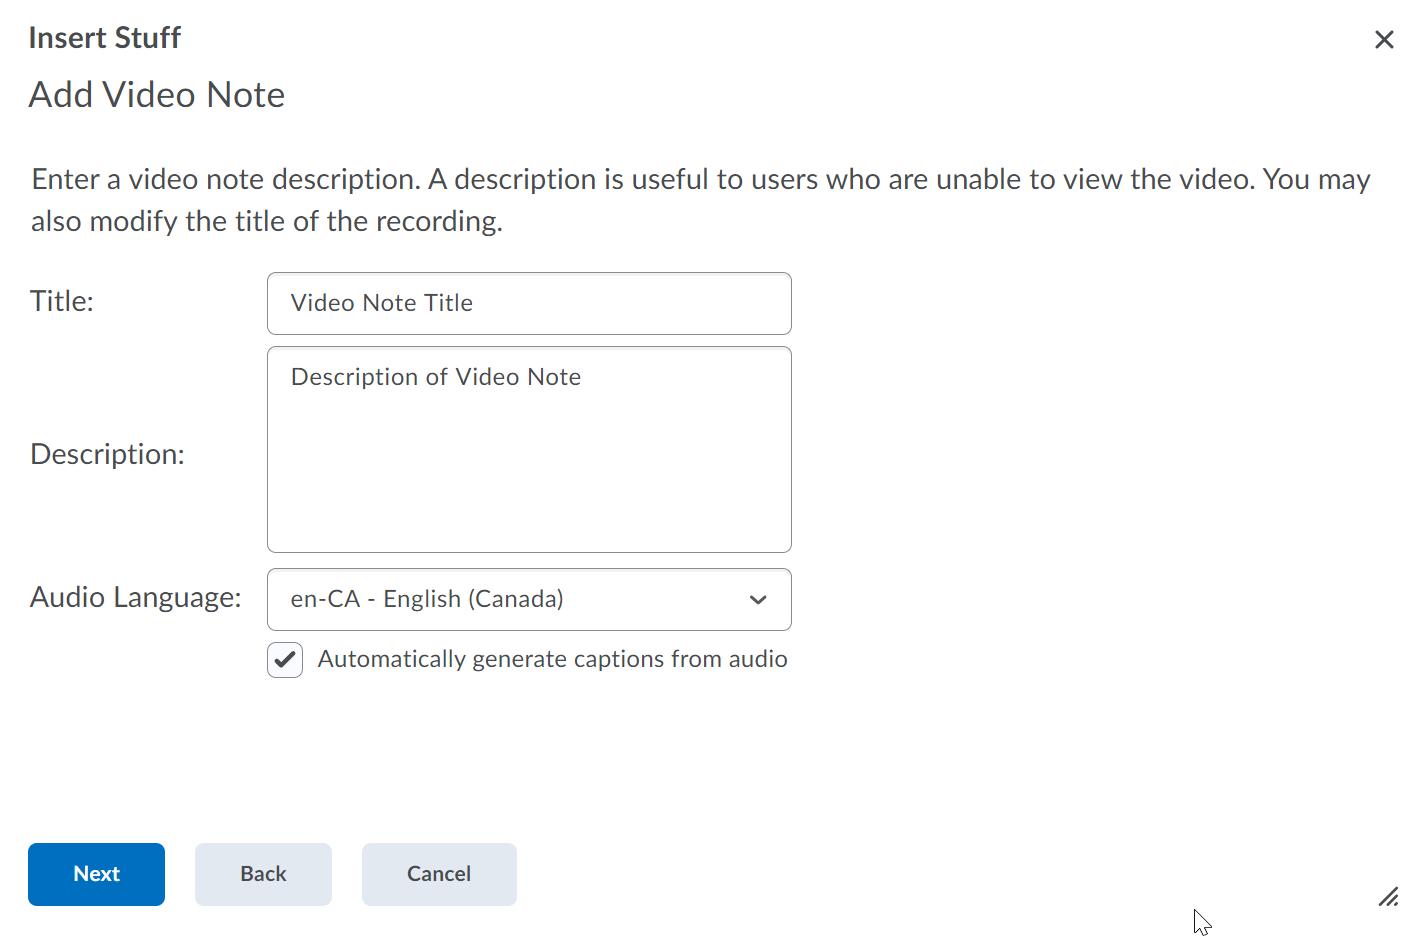 Add Video Note details. Title field, Description Field, and Audio Language drop-down menu with en-CA - English (Canada) selected. 'Automatically generate captions from audio' check box selected